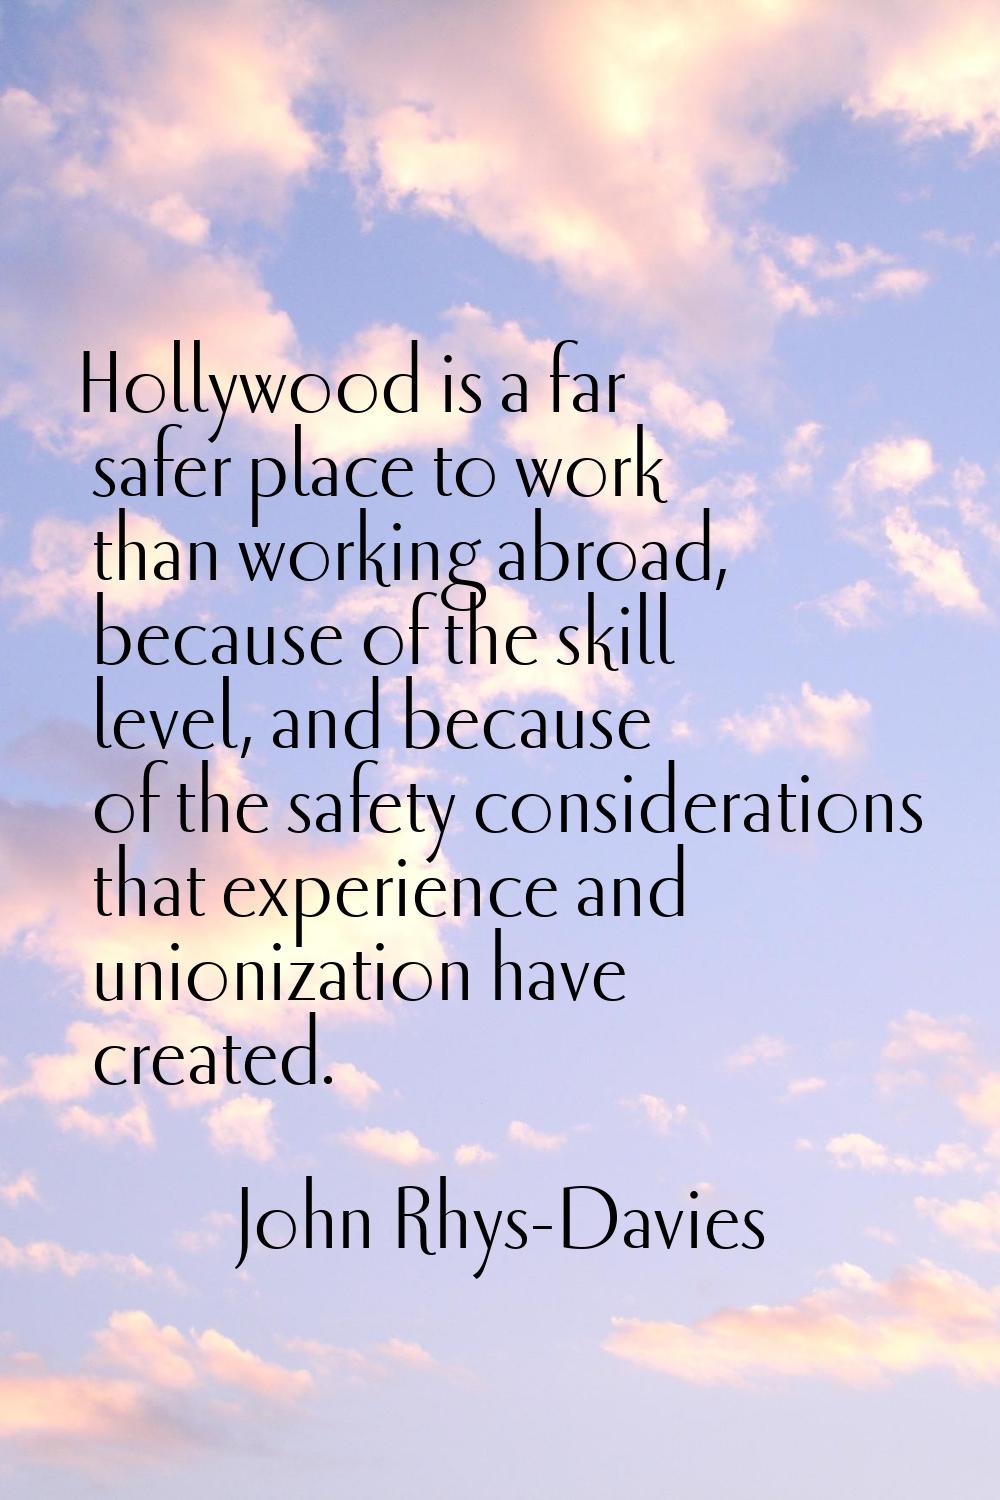 Hollywood is a far safer place to work than working abroad, because of the skill level, and because